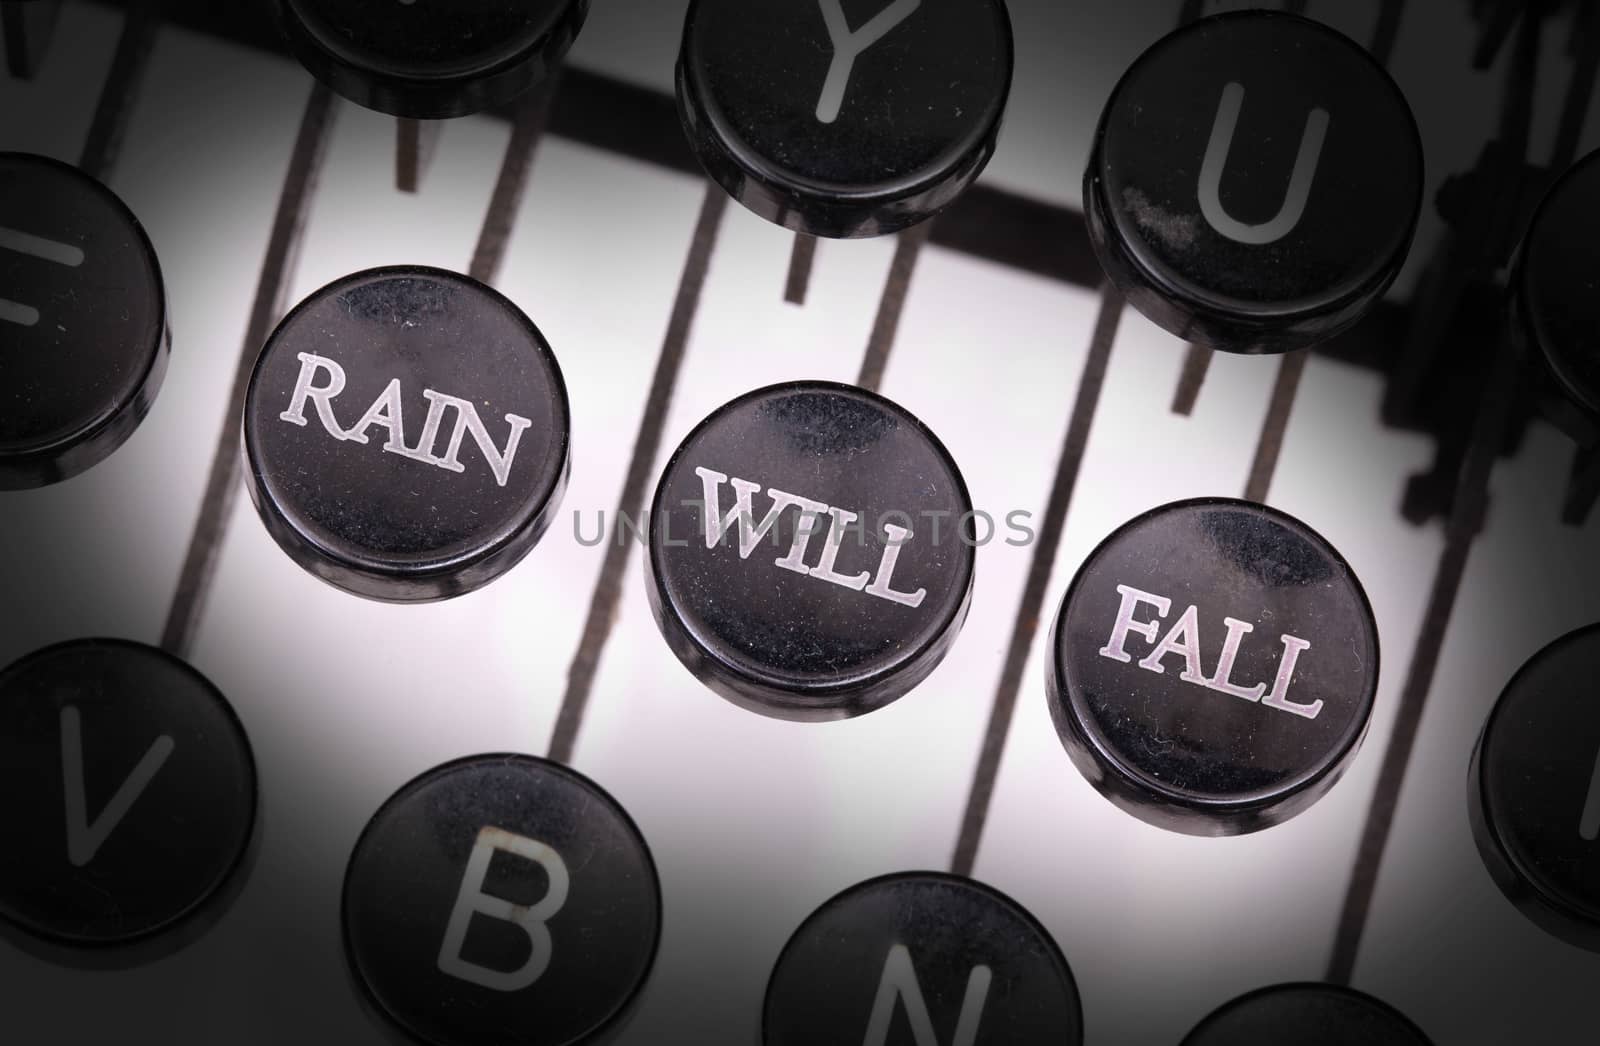 Typewriter with special buttons, rain will fall